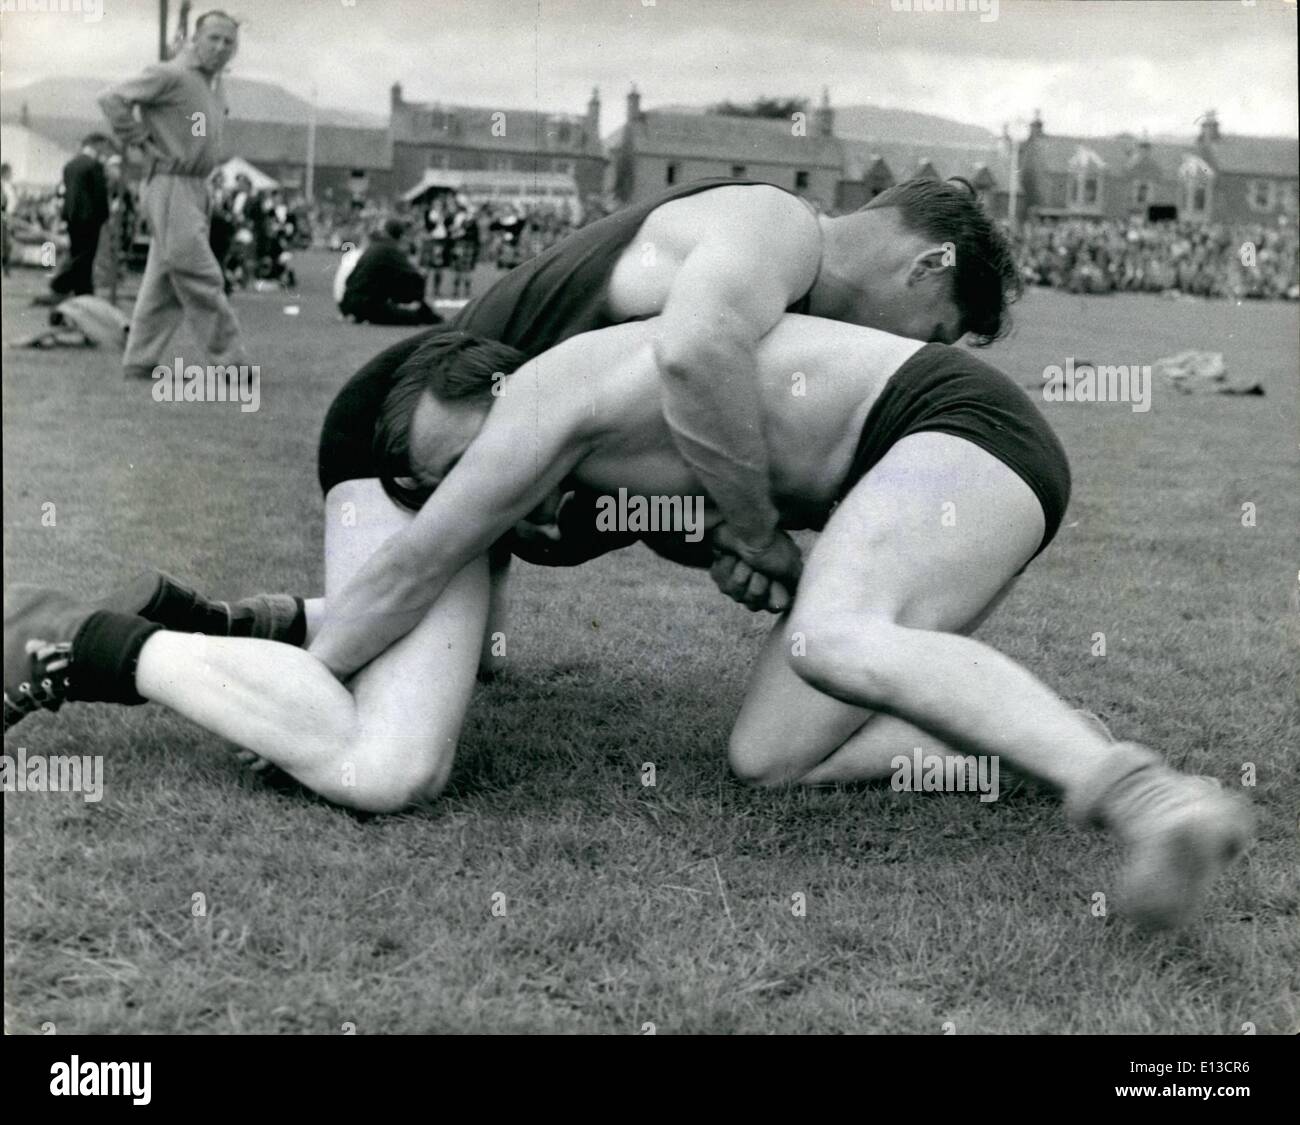 Mar. 02, 2012 - Crieff Highland Gathering At Market Park, Crieff: Two brawny Scots get down to it during the Cumberland style Wrestling event. Stock Photo